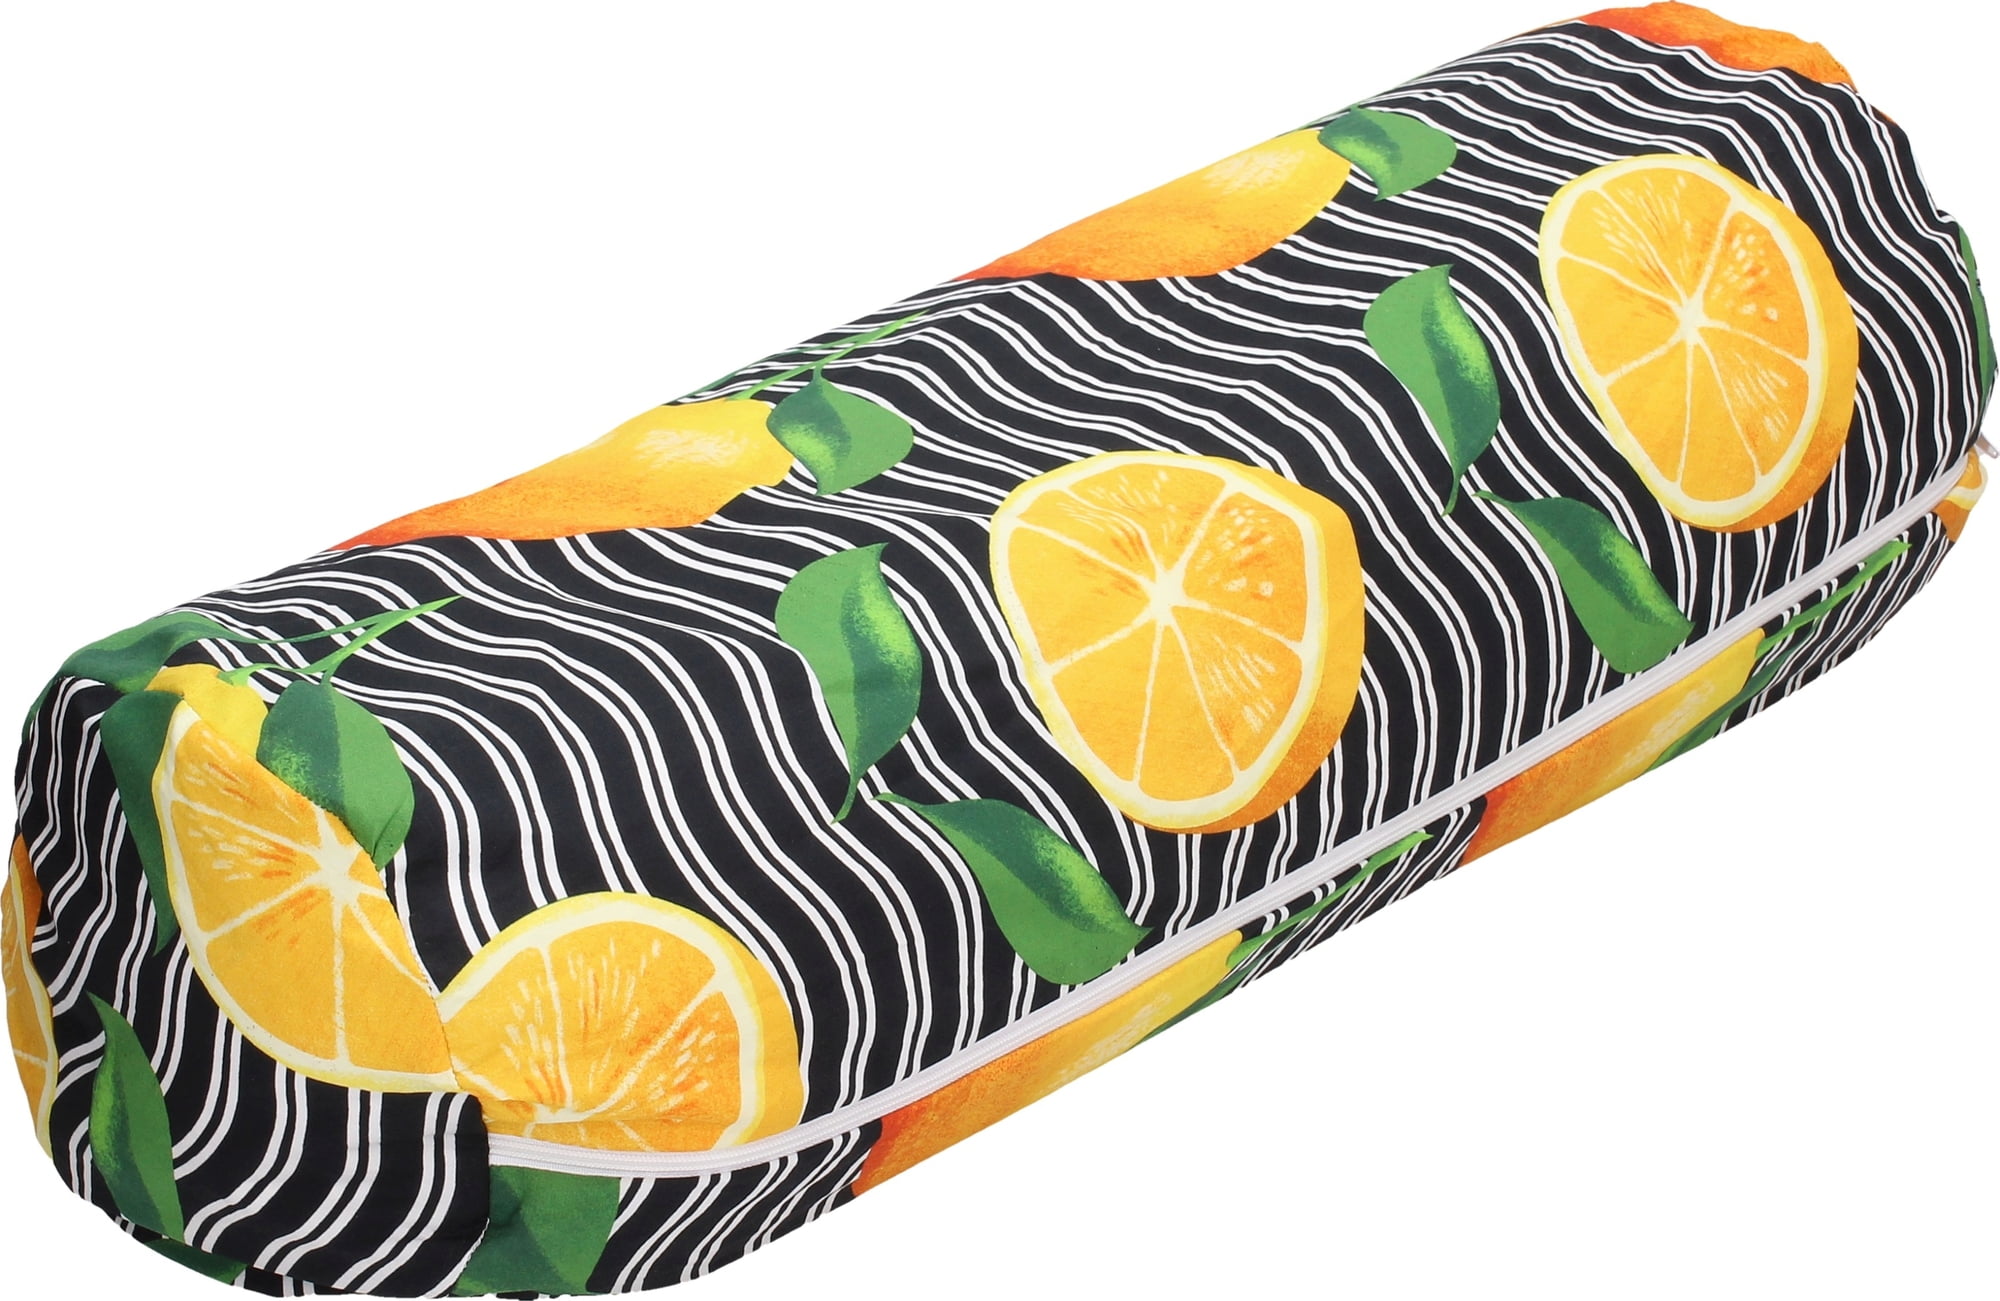 FRIUBASCA Spelt Yoga Bolster with Aromatic Herbs - Waves with orange print